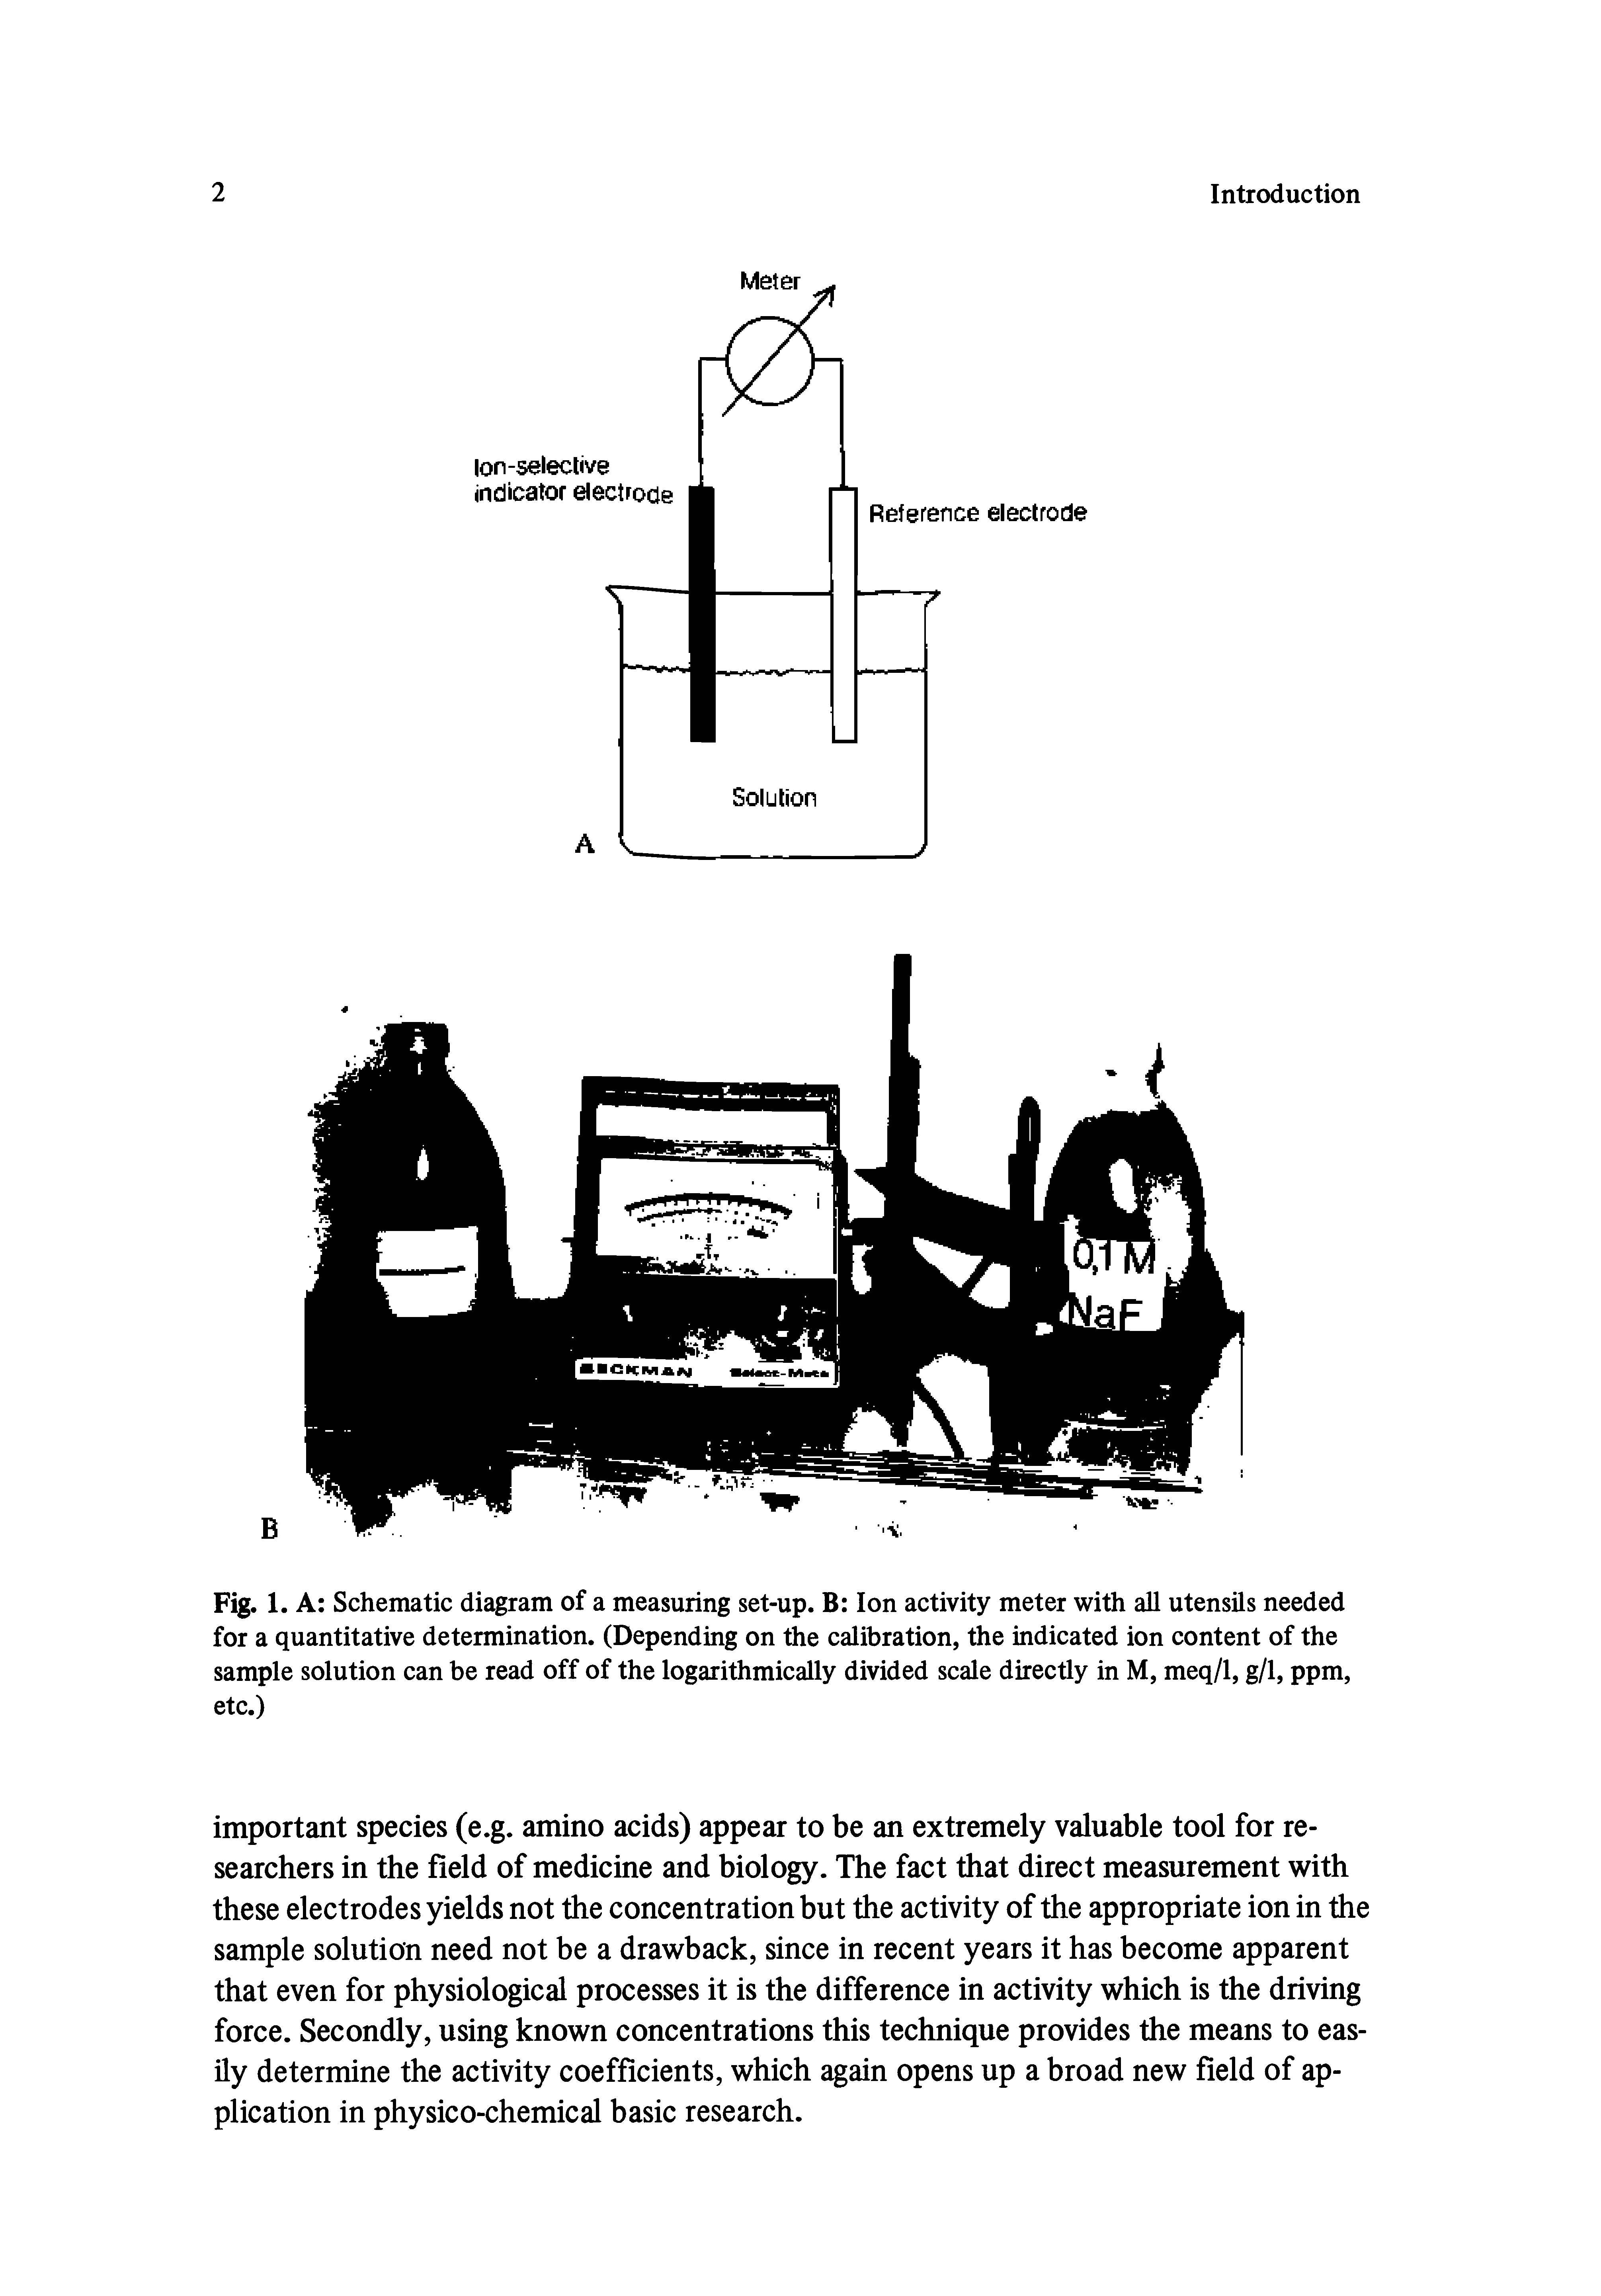 Fig.1. A Schematic diagram of a measuring set-up. B Ion activity meter with all utensils needed for a quantitative determination. (Depending on the calibration, the indicated ion content of the sample solution can be read off of the logarithmically divided scale directly in M, meq/1, g/1, ppm, etc.)...